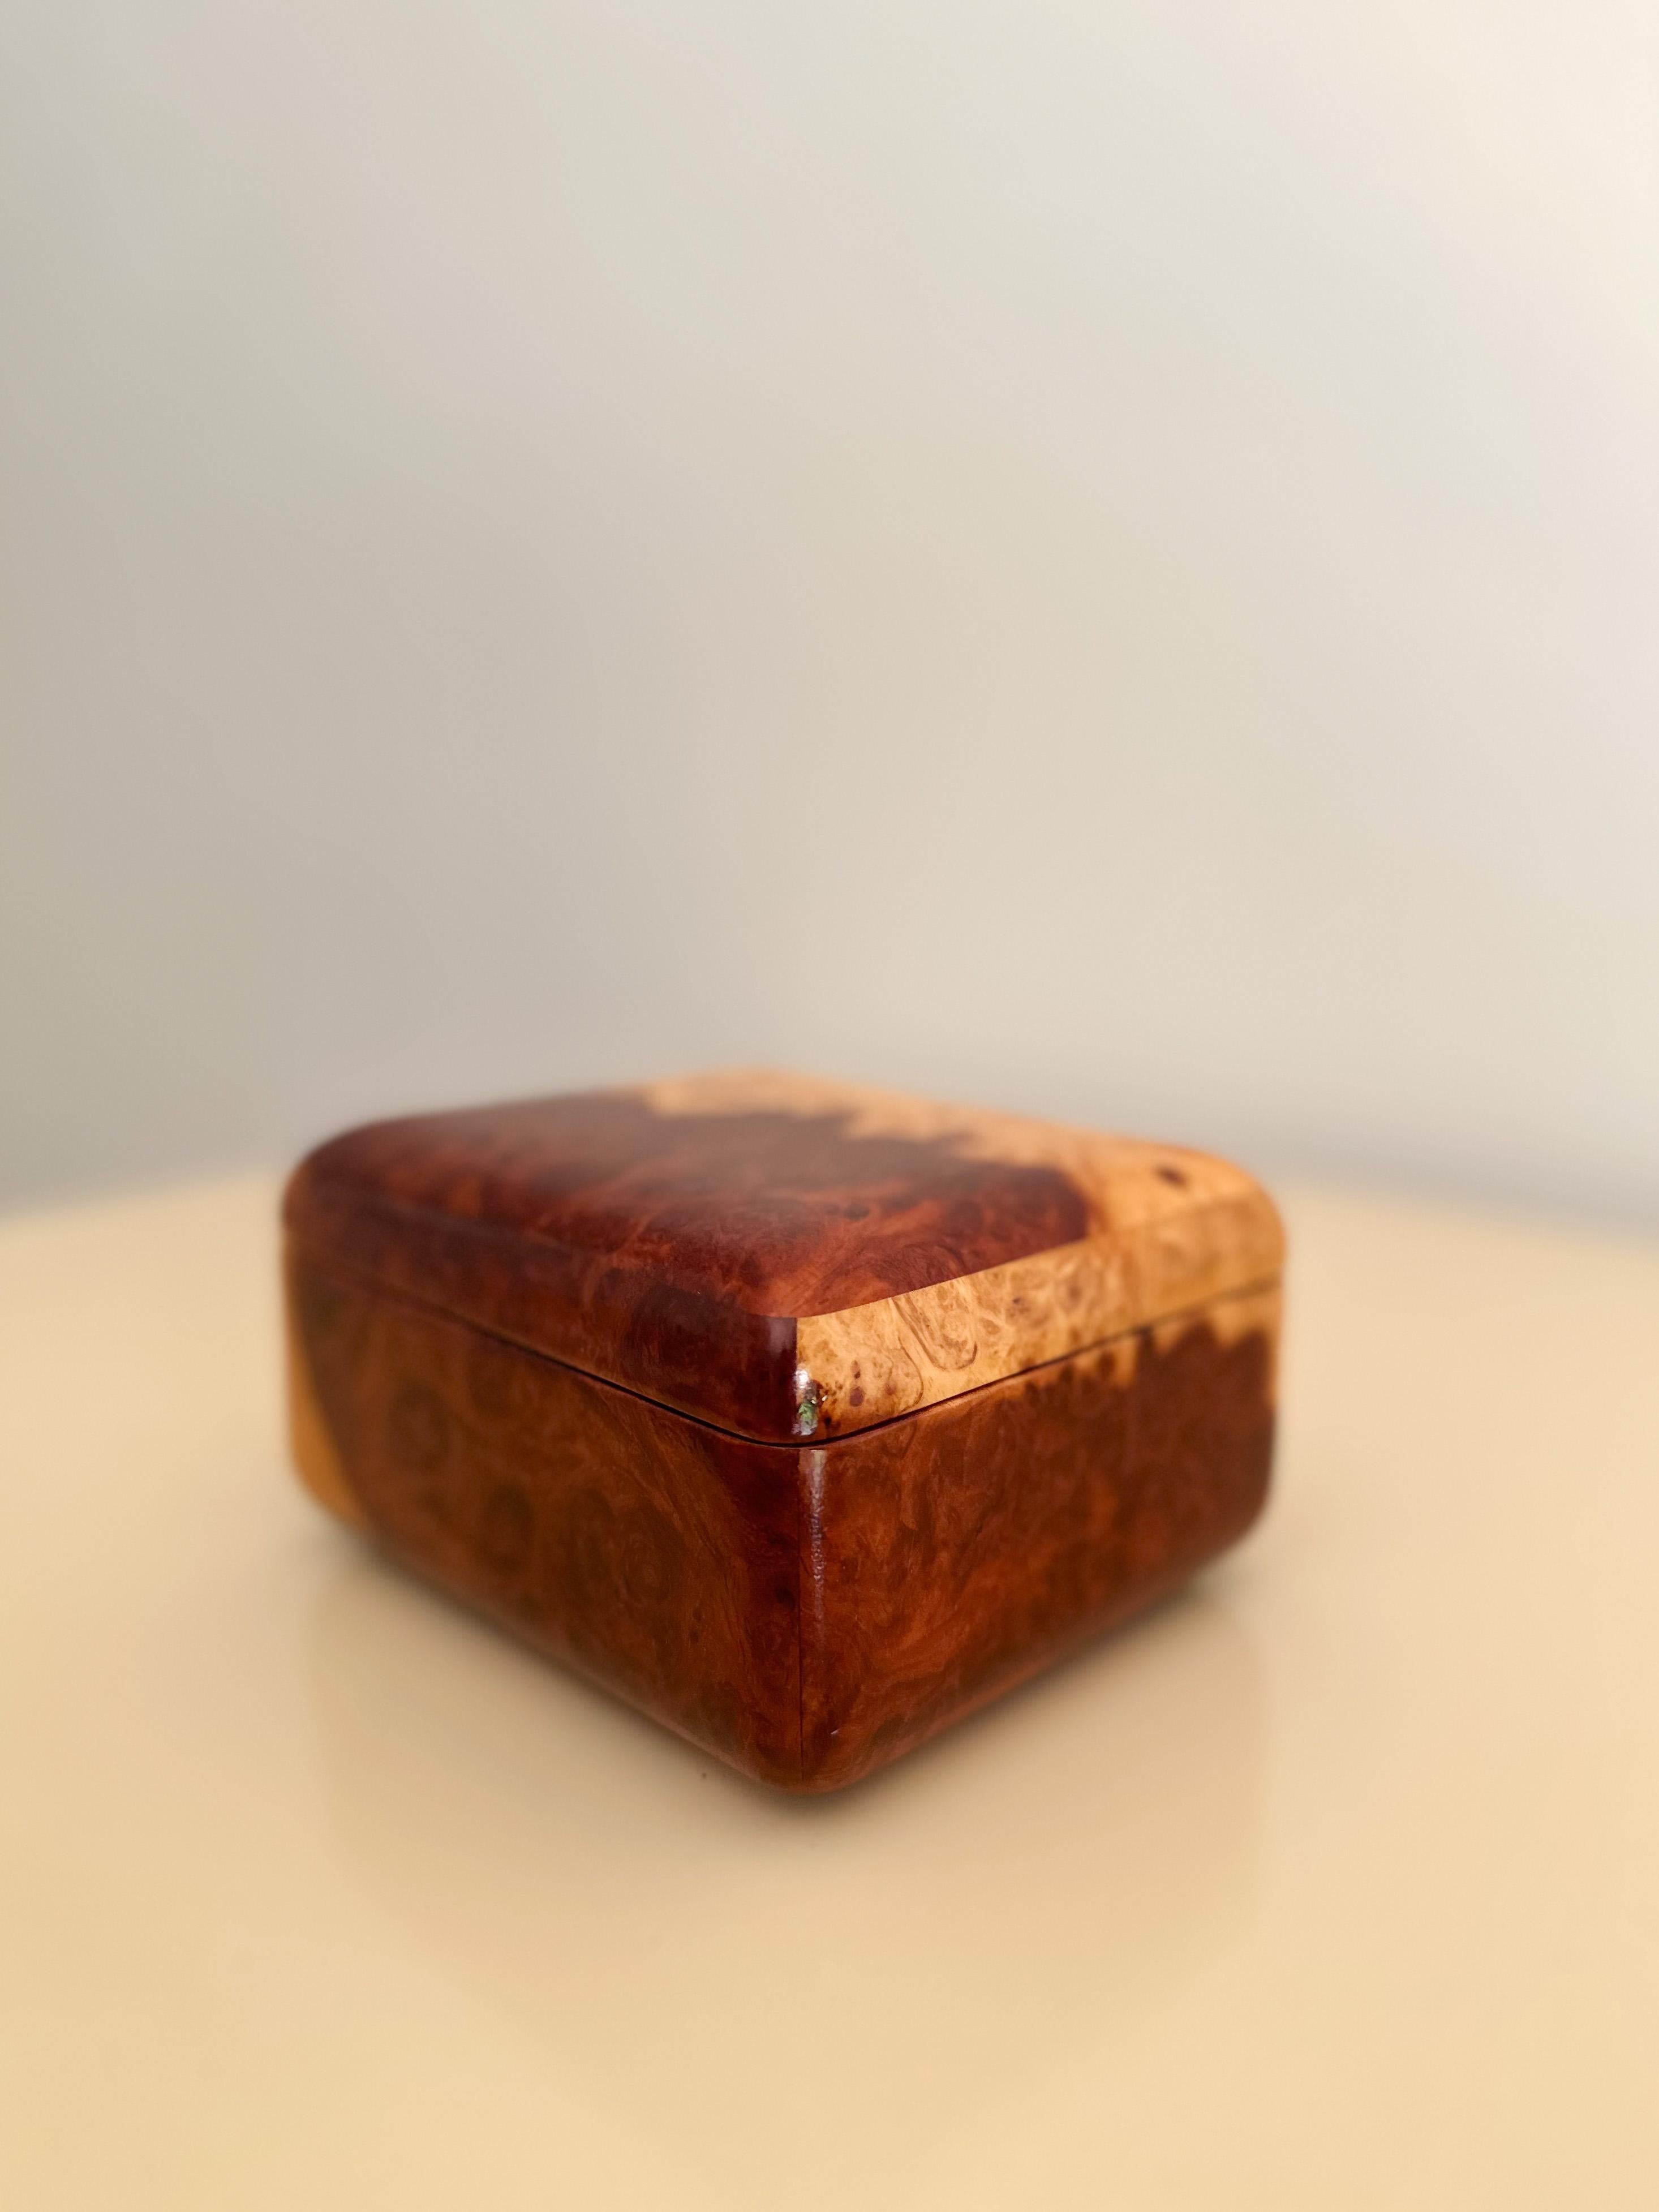 Beautiful lacquered burlwood box with rounded edges and hinged top, perfect for storing rings and small trinkets. Fantastic grain and color, with medium-dark-reddish brown mixed with light-blonde. In excellent vintage condition.